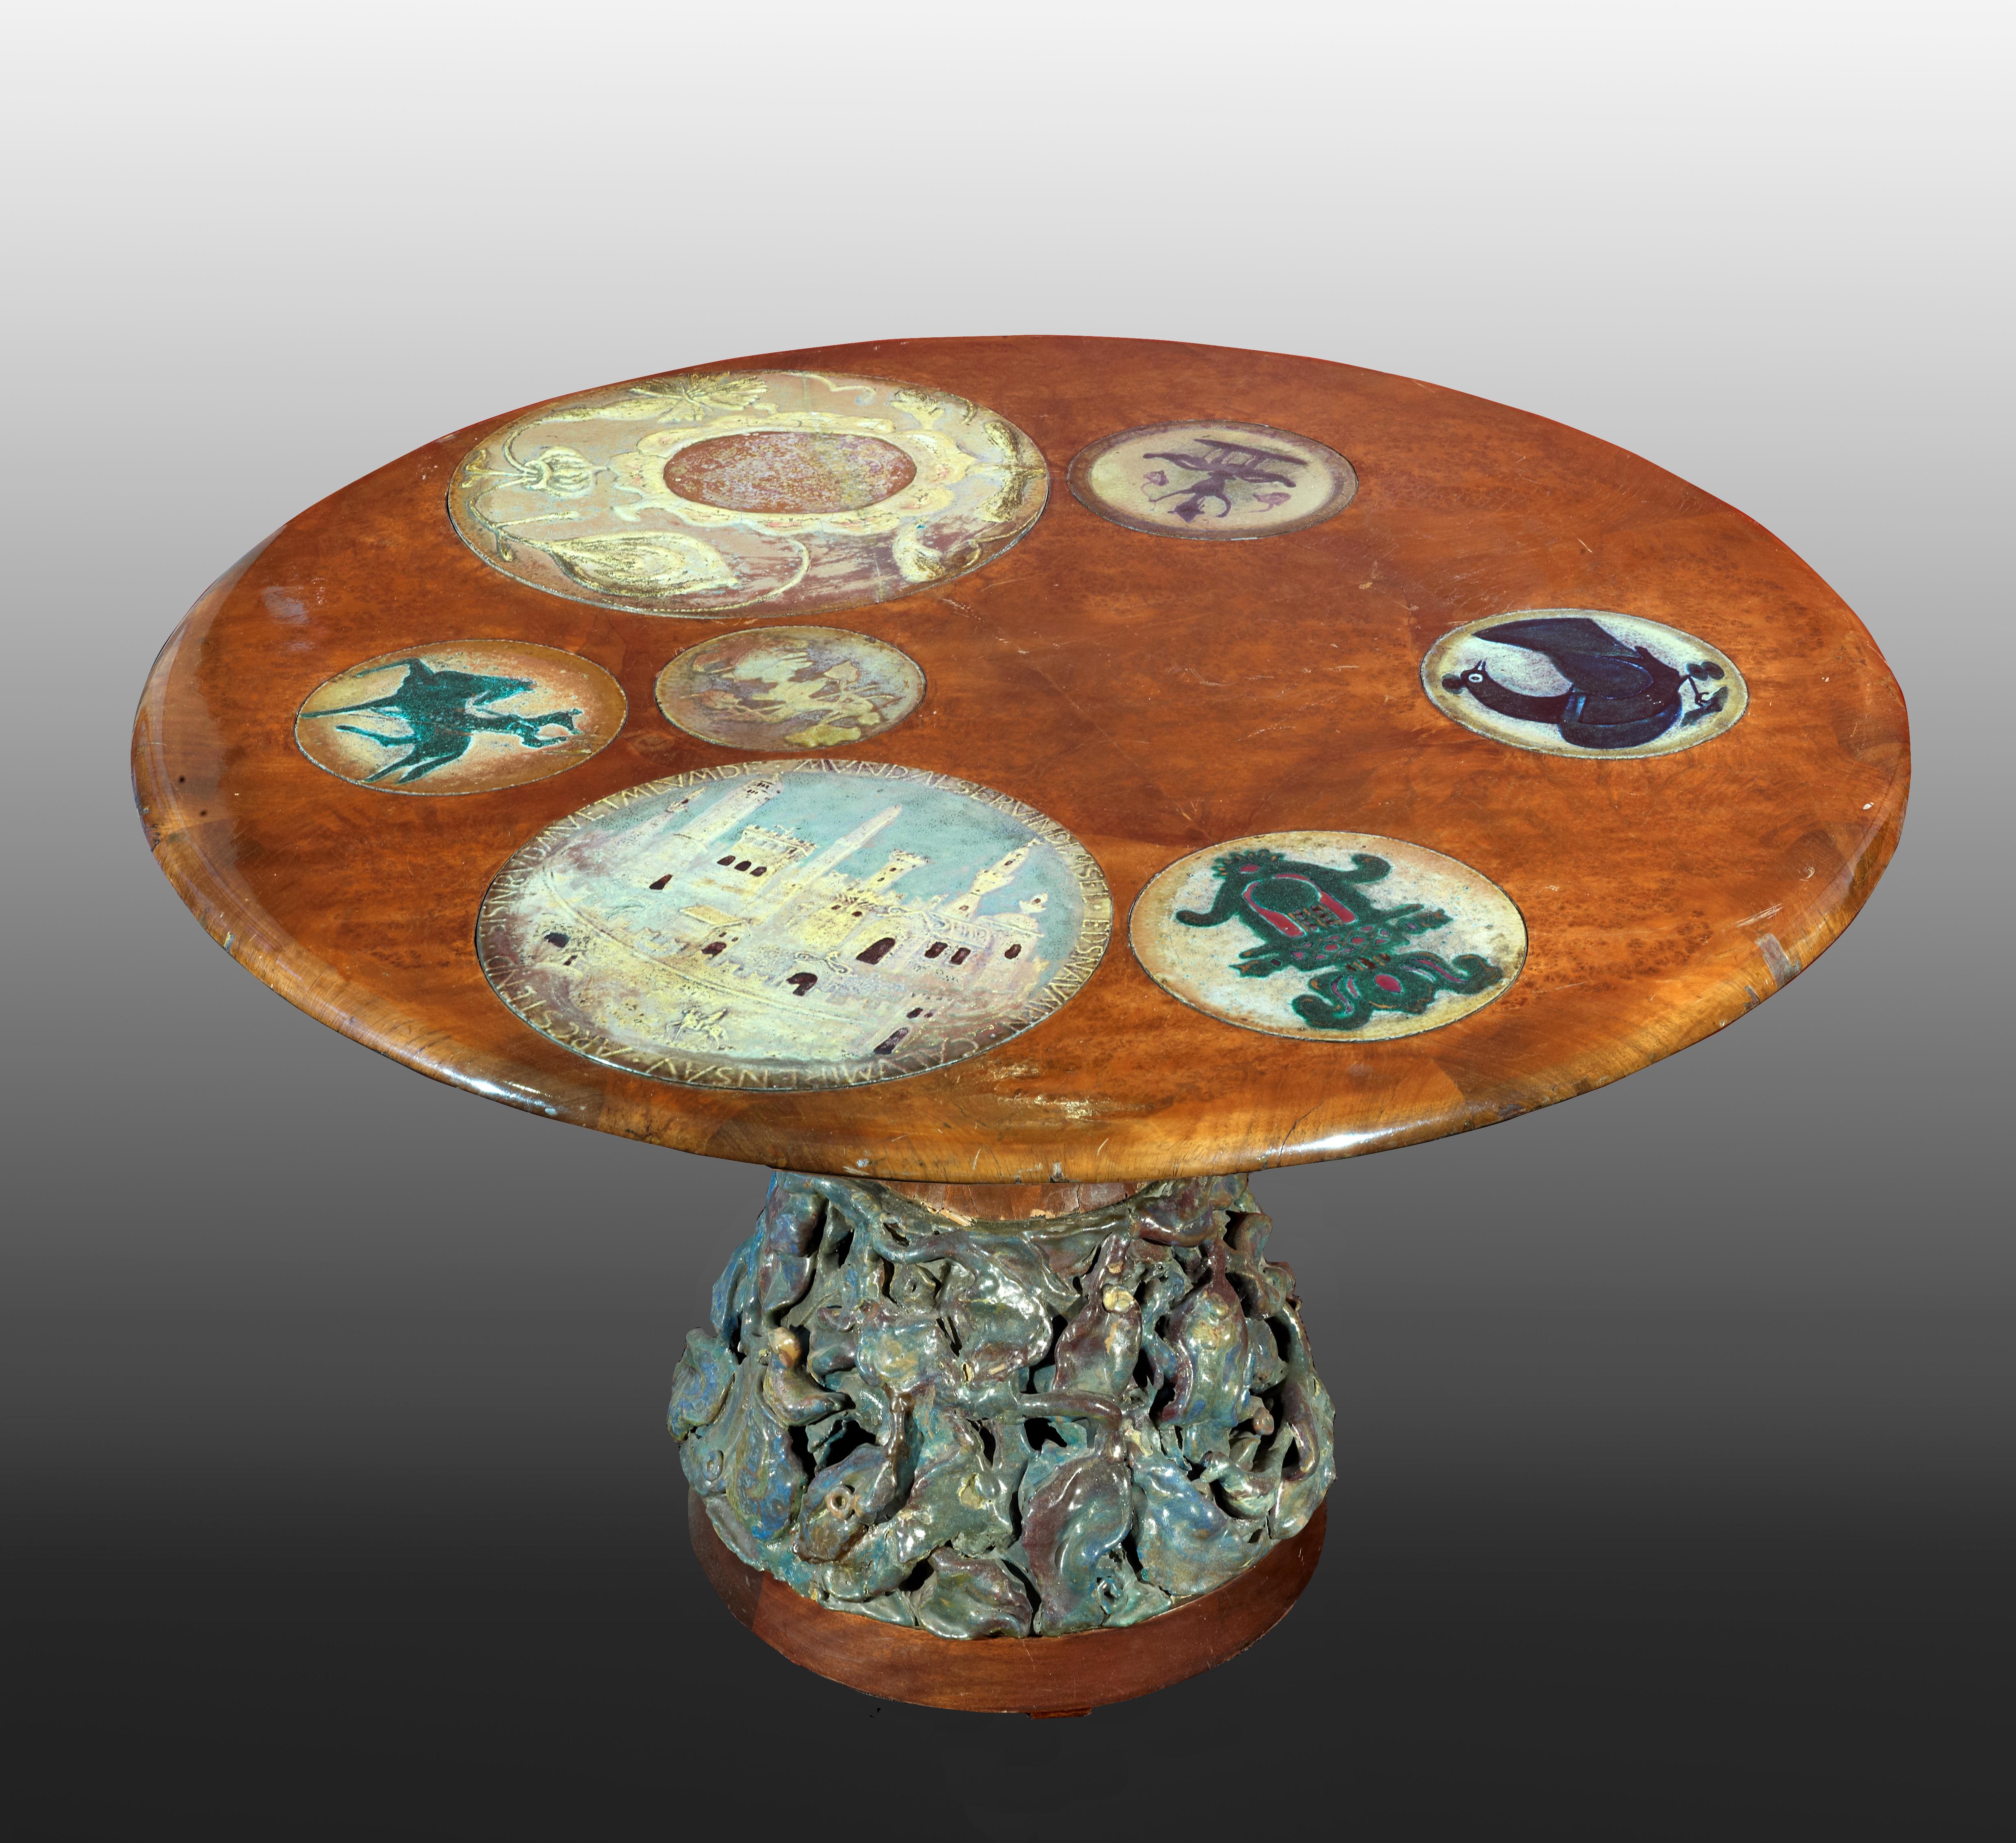 Coffee table around 1950s attributed to Pietro Melandri.
Ceramic and wood.
Amboina wood (loupe d’amboine) Height 62 cm, diameter 100 cm.
The top is decorated by 7 enameled ceramic plates. The plate decorated by a horse and the one decorated with